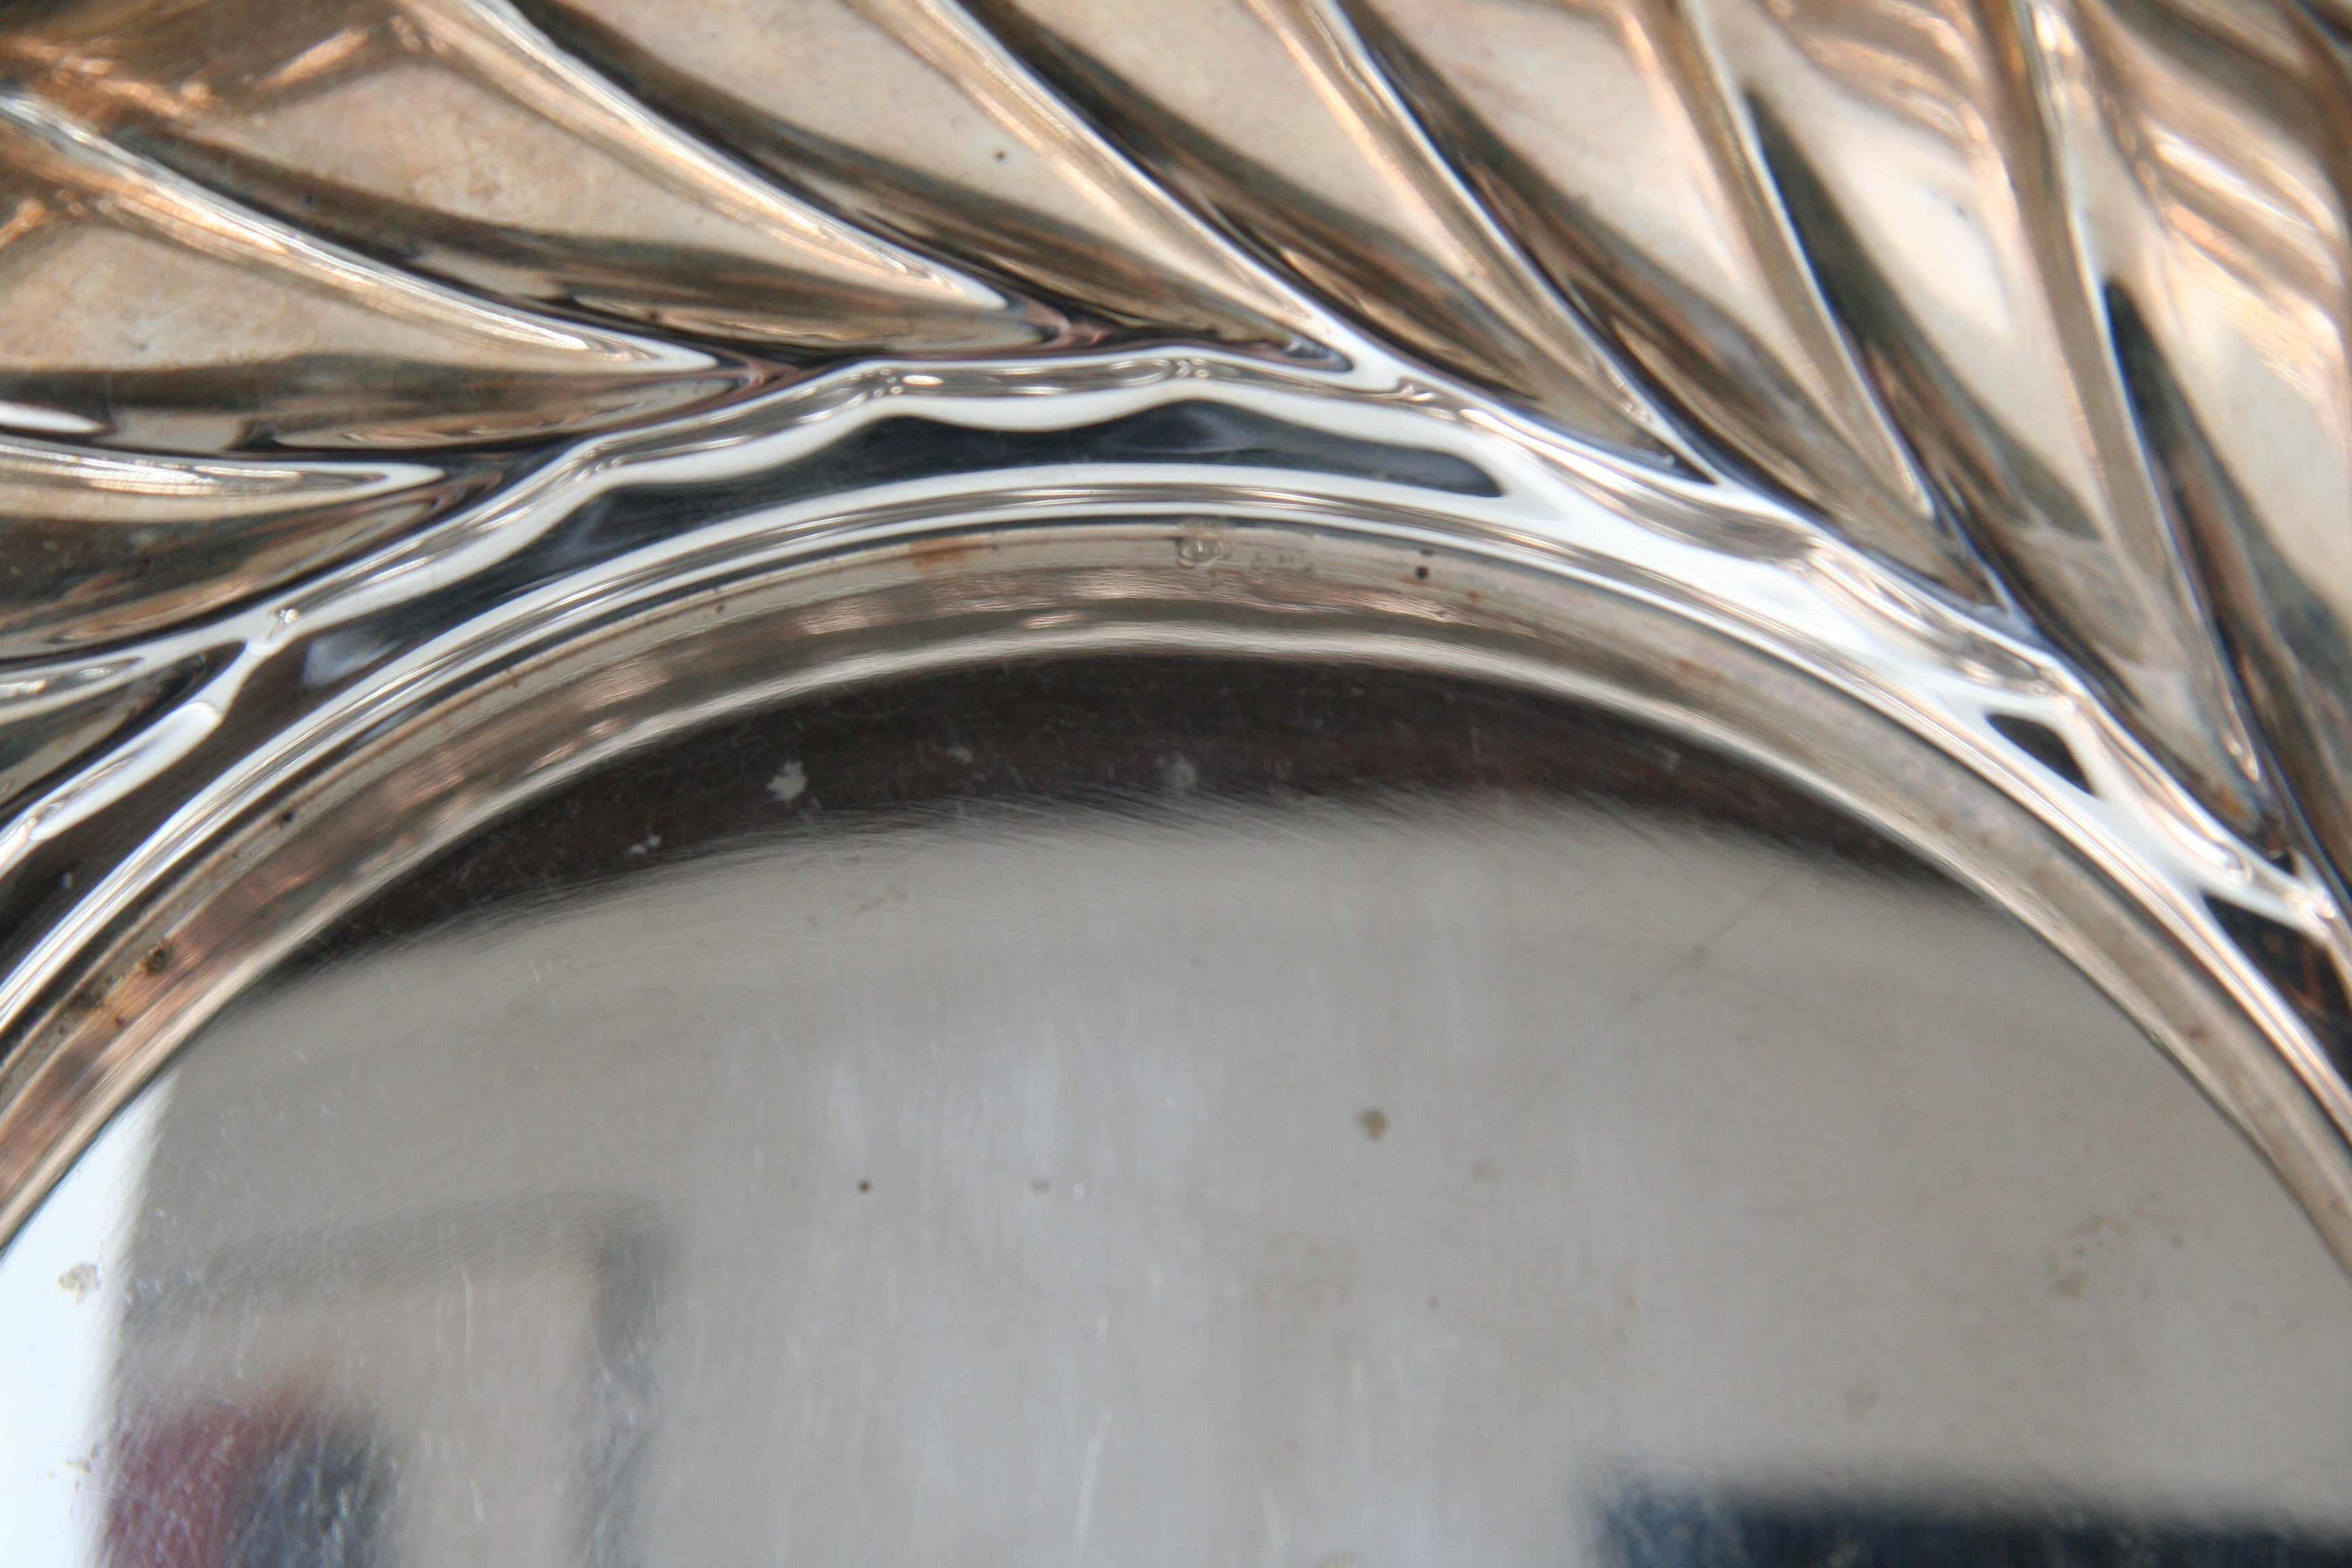 An 800 Silver Serving Bowl with Gold Wash Produced by Prato